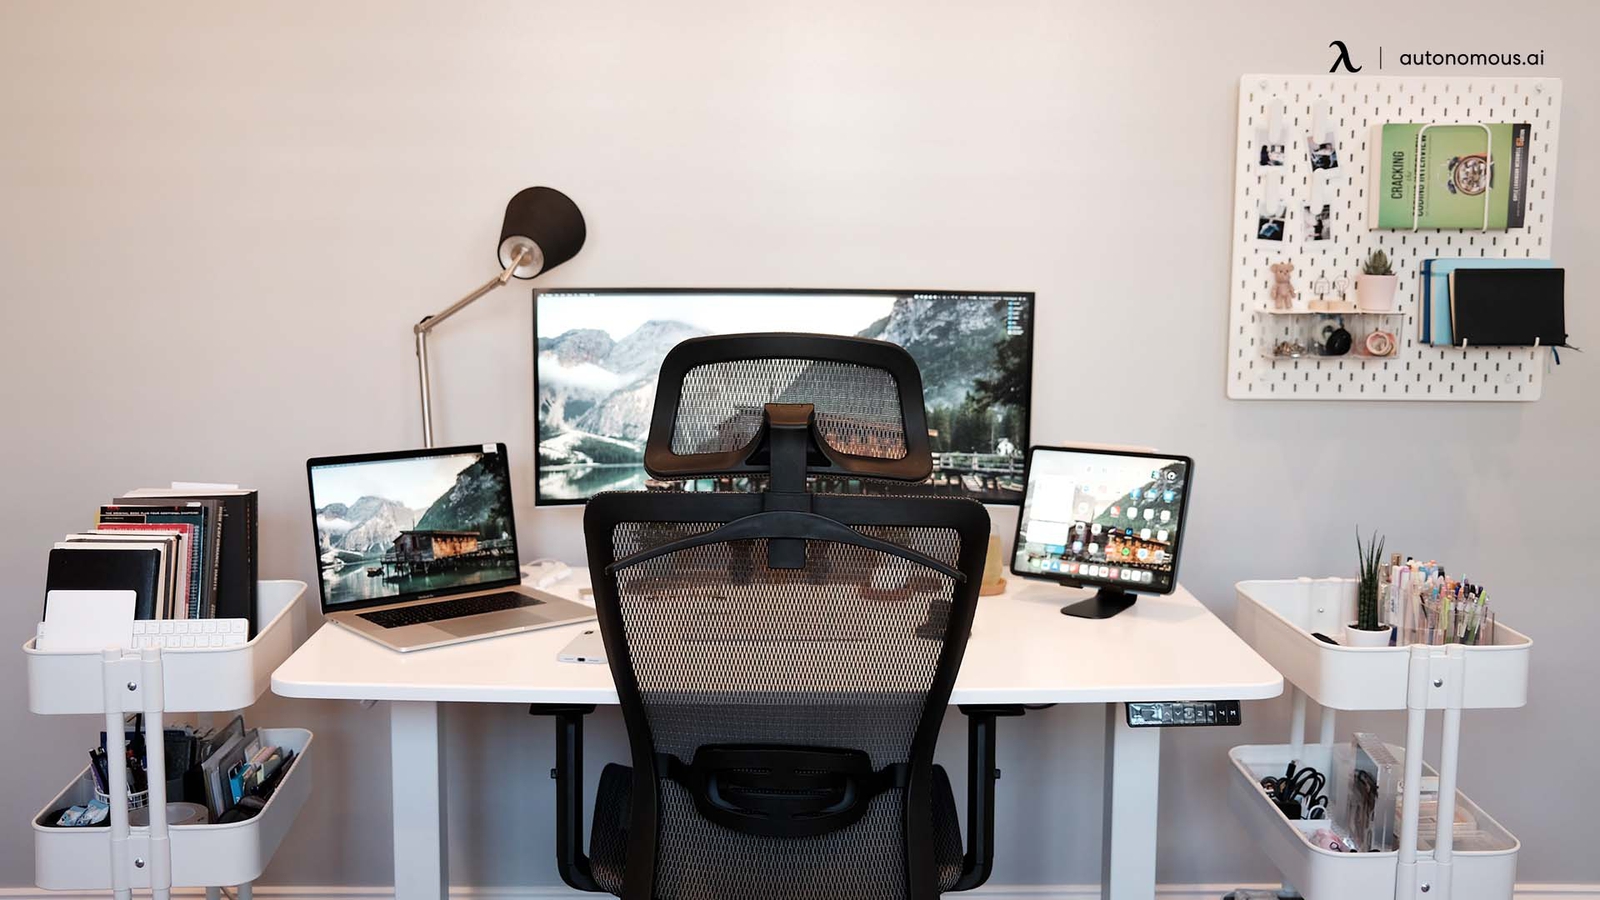 What You Need to Consider When Customizing Your Standing Desk